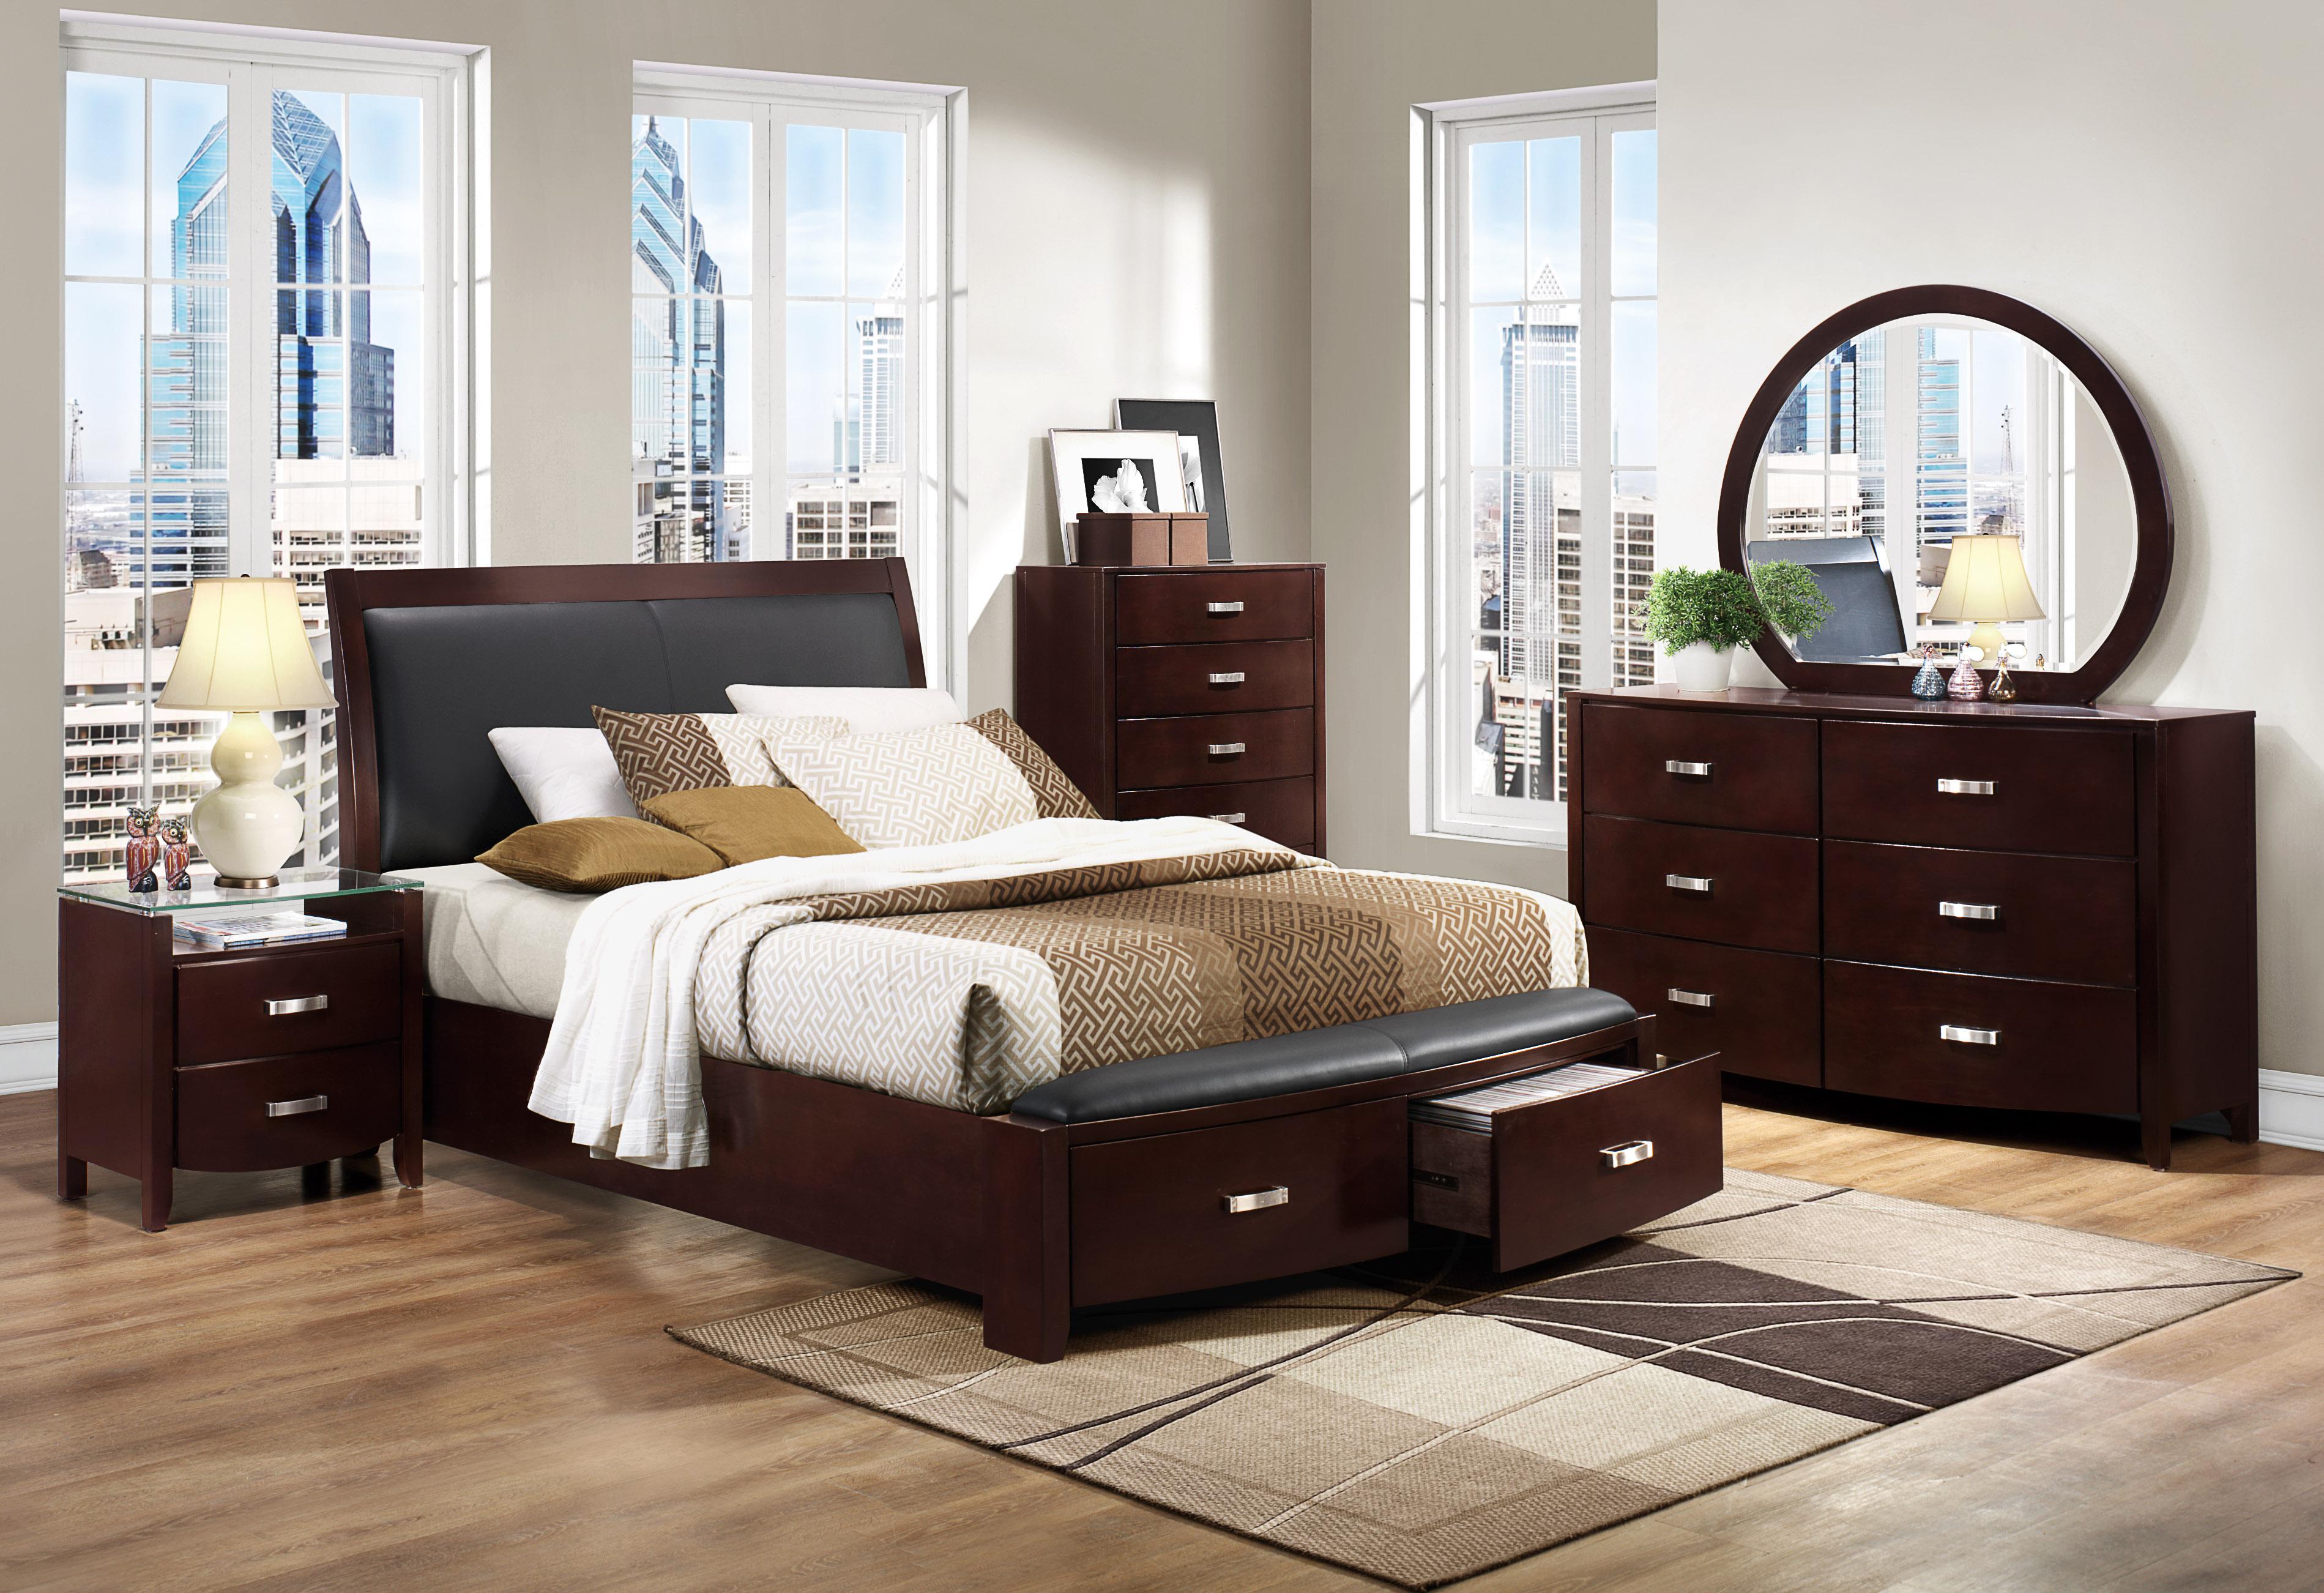 Contemporary Bedroom Set 1737NC-1-6PC Lyric 1737NC-1-6PC in Dark Cherry Faux Leather